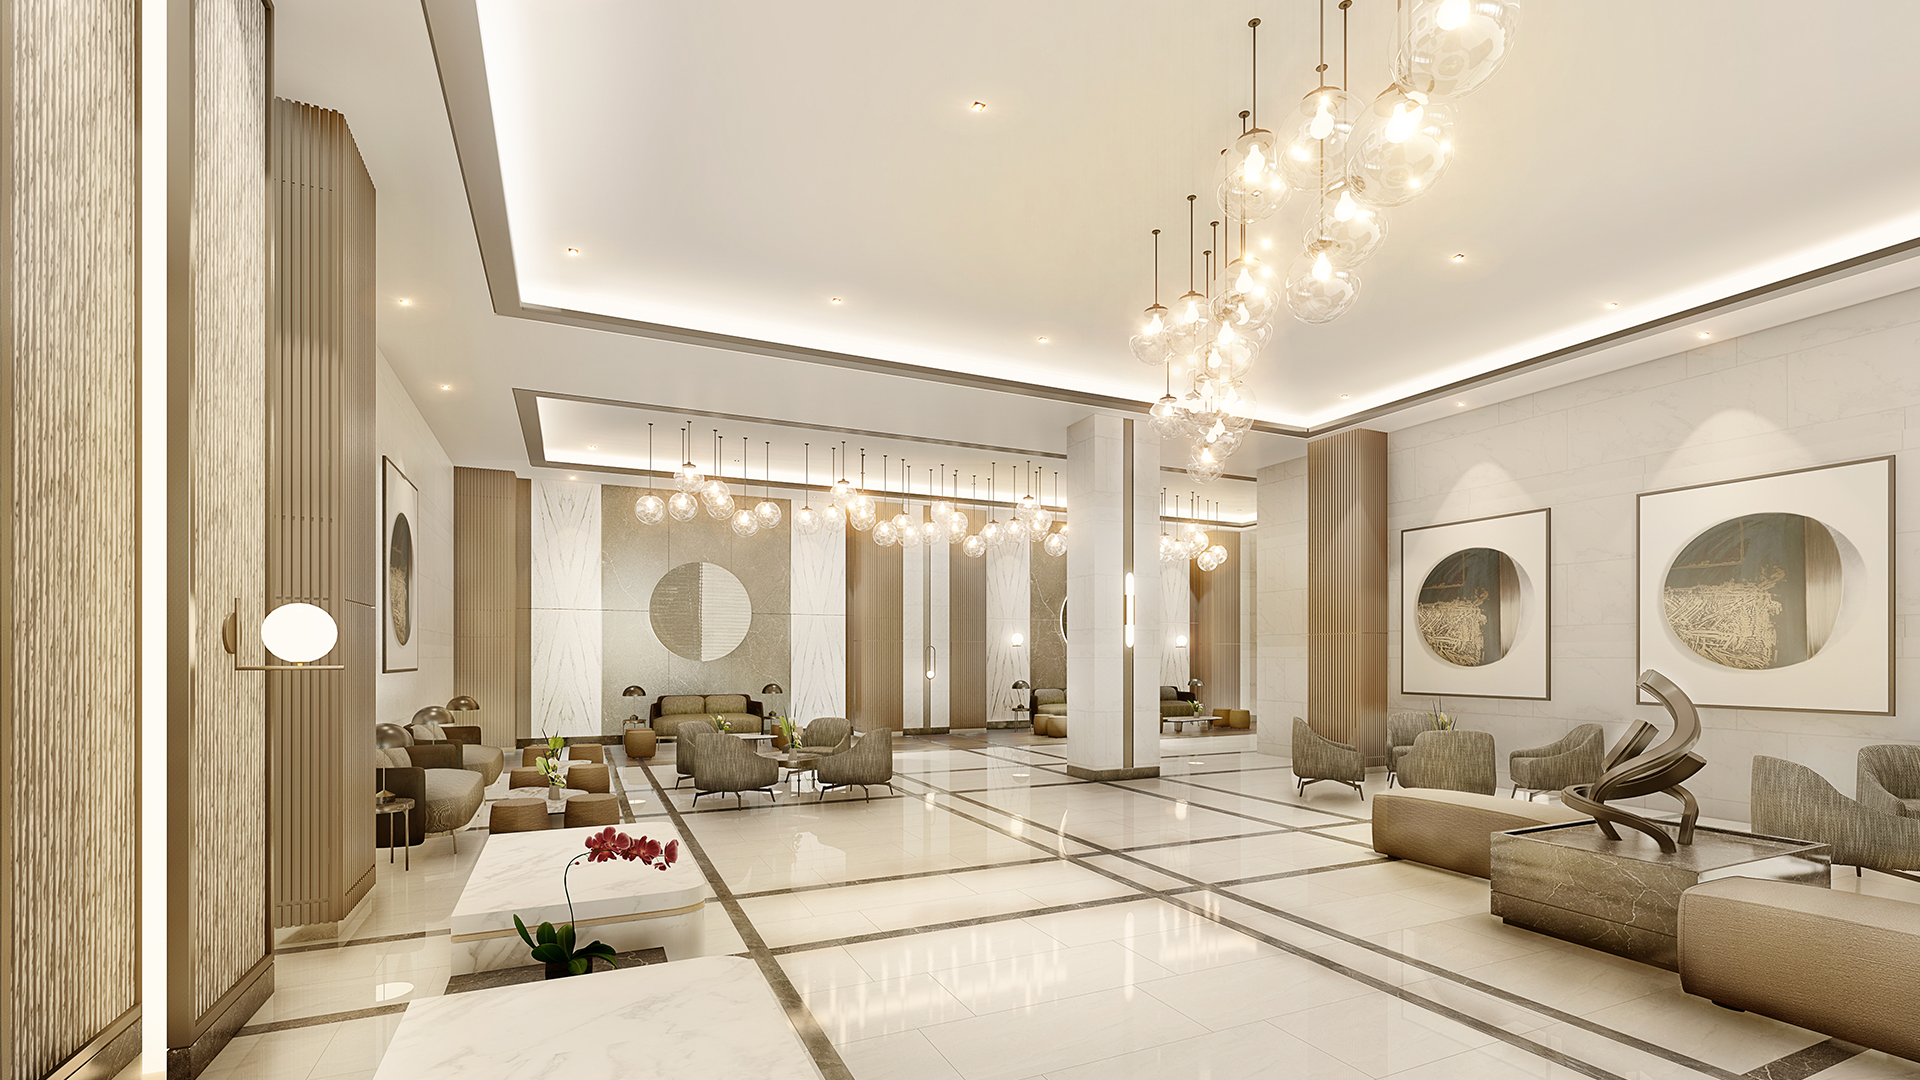 A luxurious hotel lobby with elegant decor and comfortable seating arrangements.